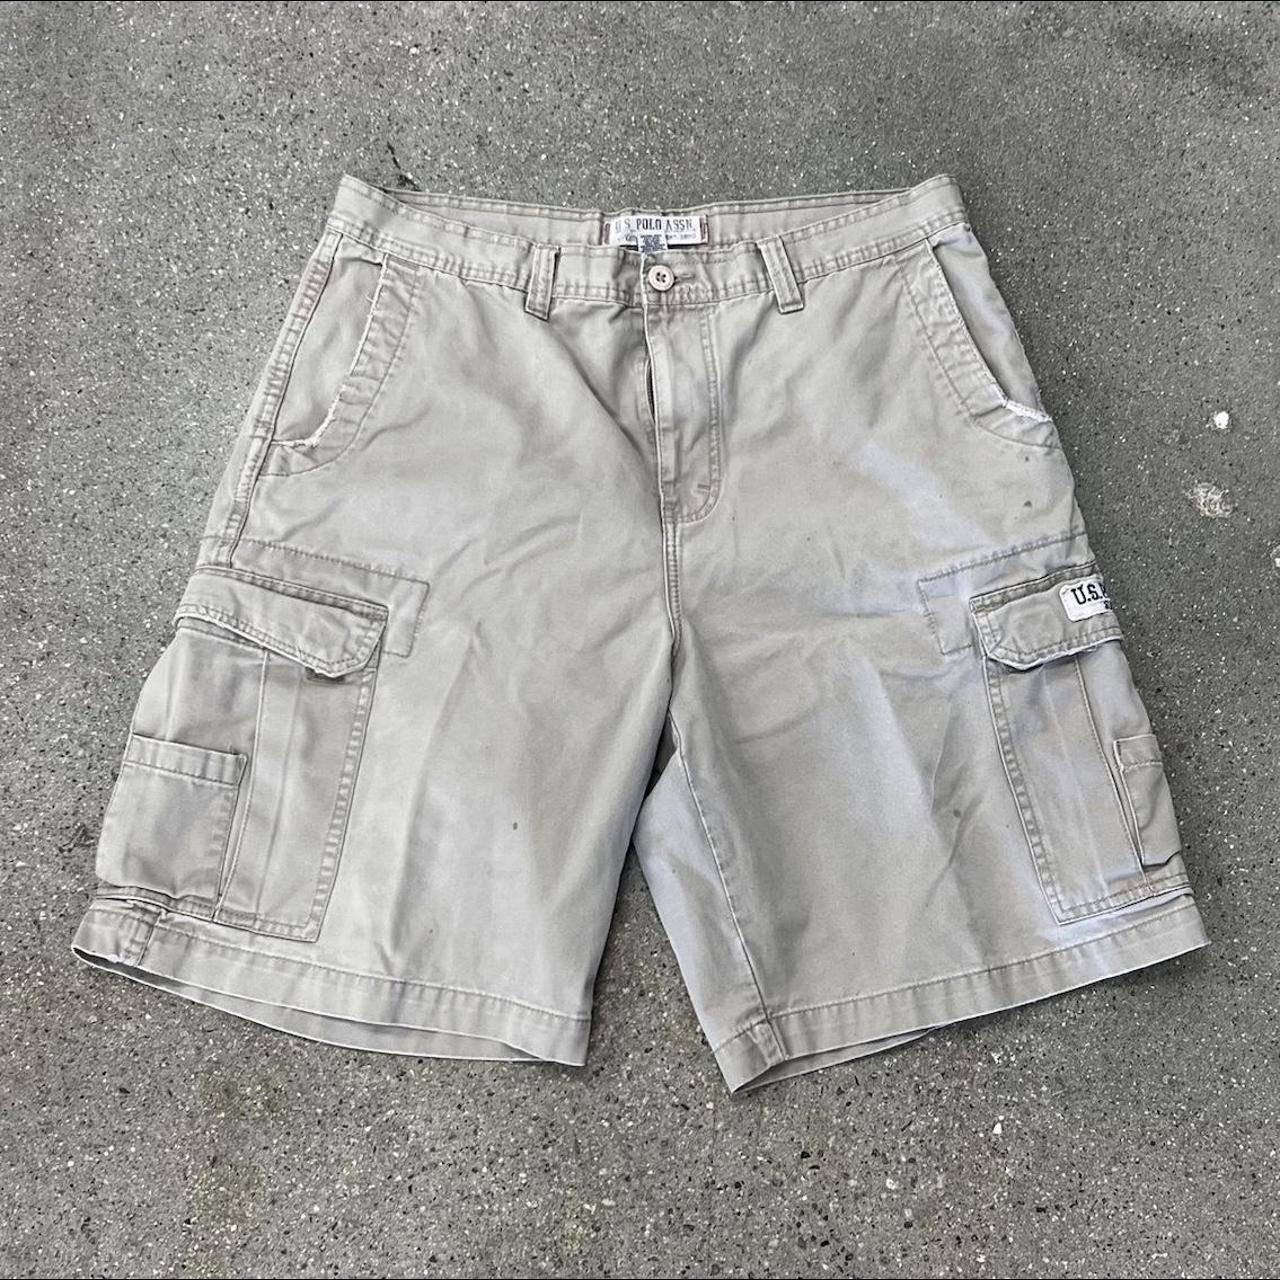 US Polo Assn Cargo Shorts - Size 34 Dm for specific... - Depop